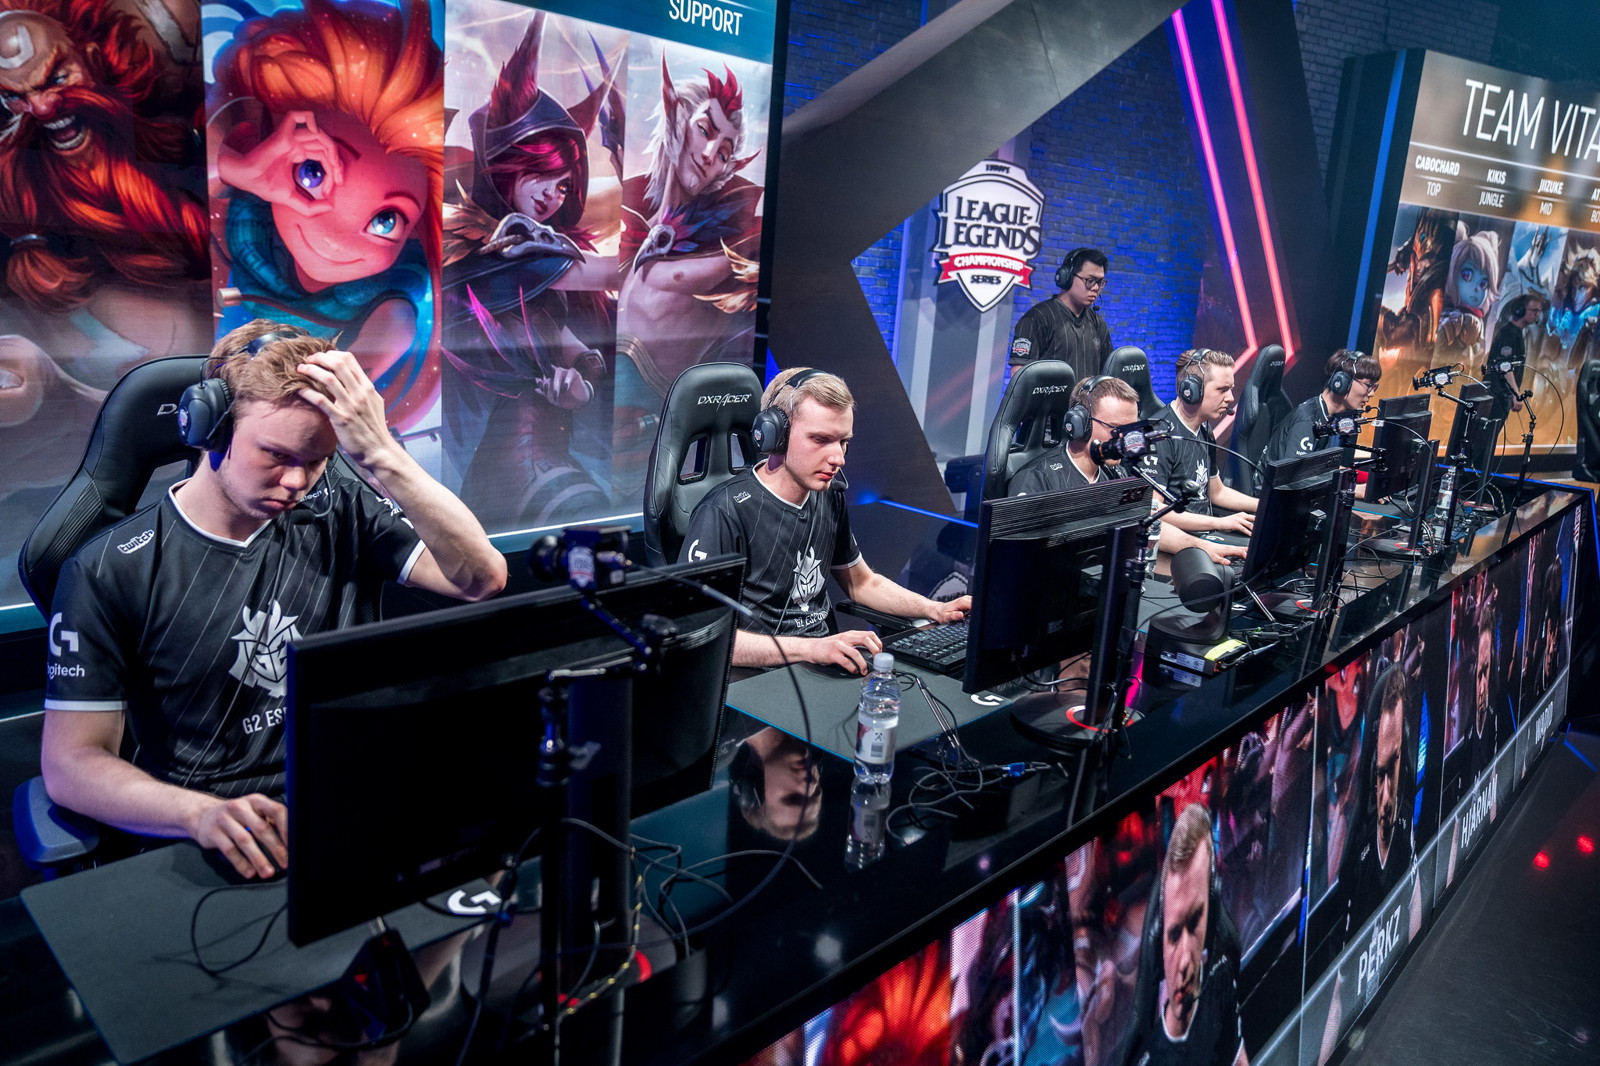 Games like League of Legends and Valorant host intense competitive scenes.